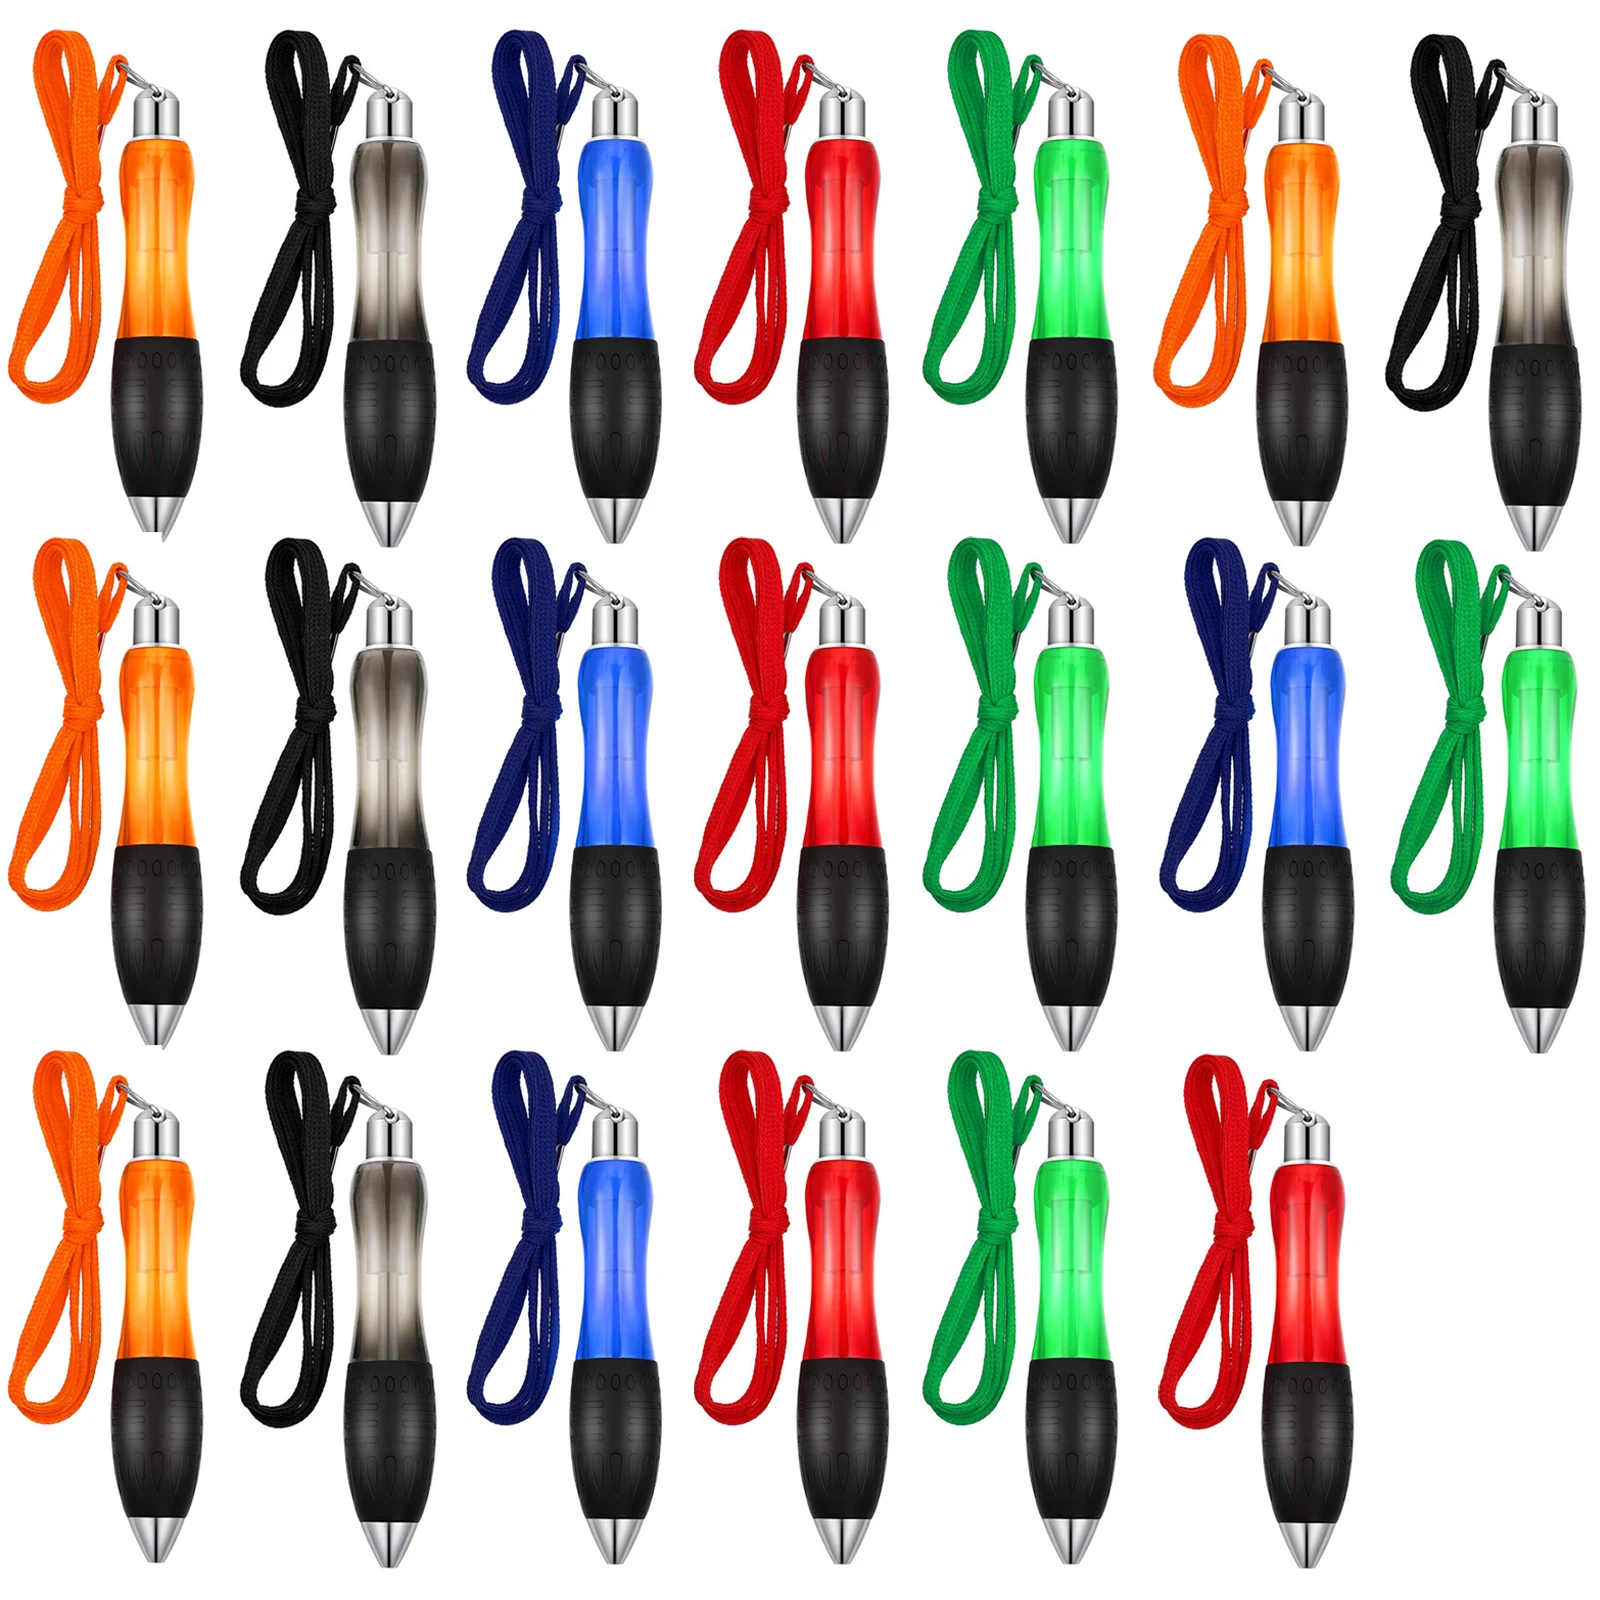 

20Pcs Retractable Large Fat Ballpoint Pen 5 Colors Handwriting Aid With Suspension Cord